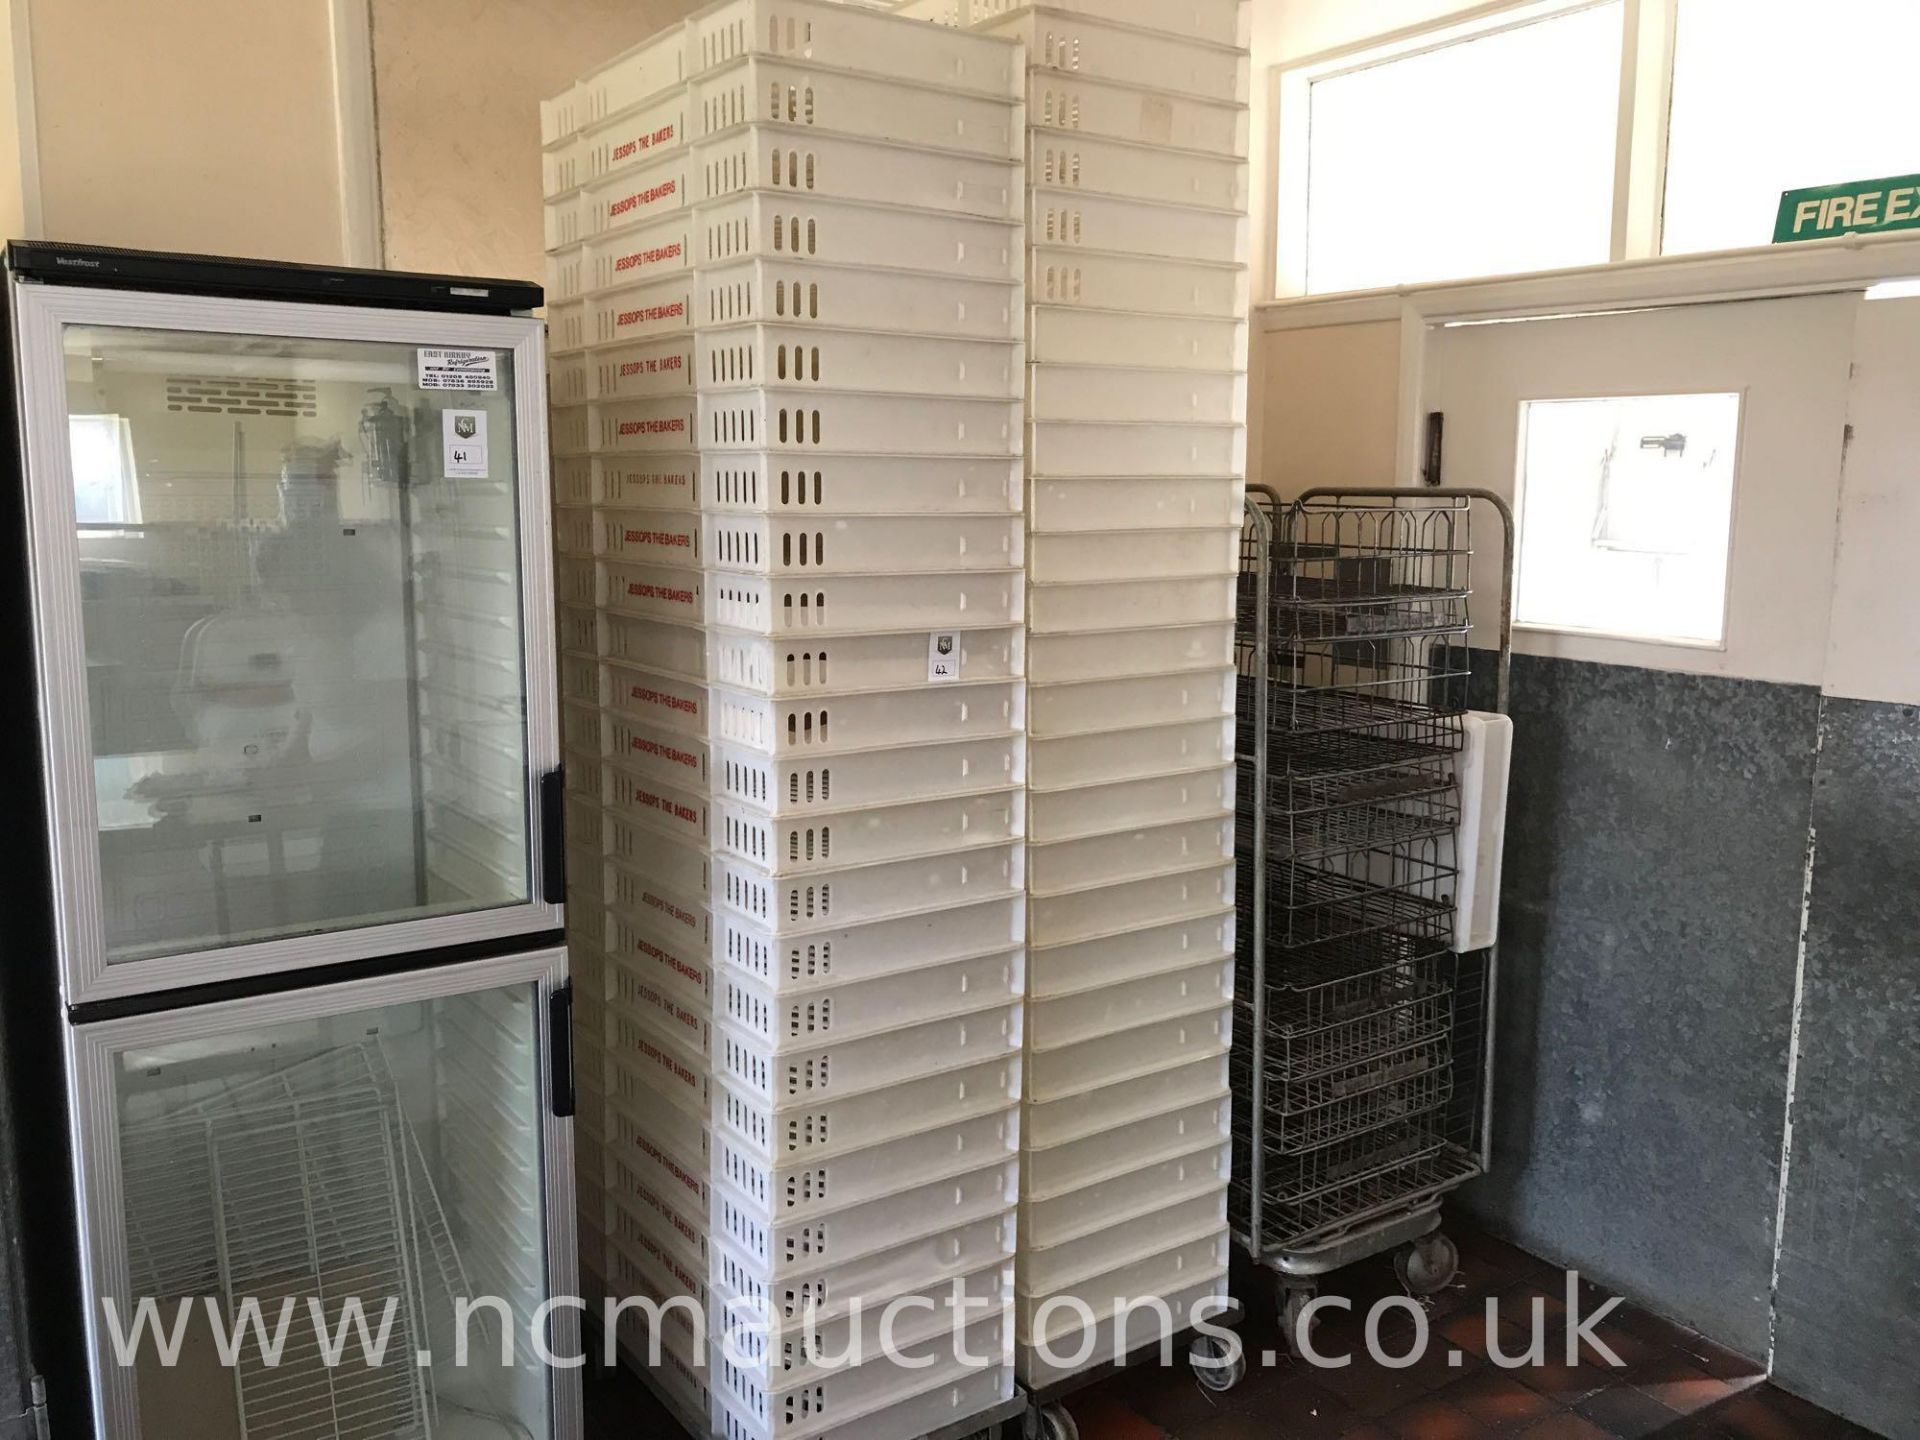 Approximately 50 Plastic Bakery Trays and Trolleys